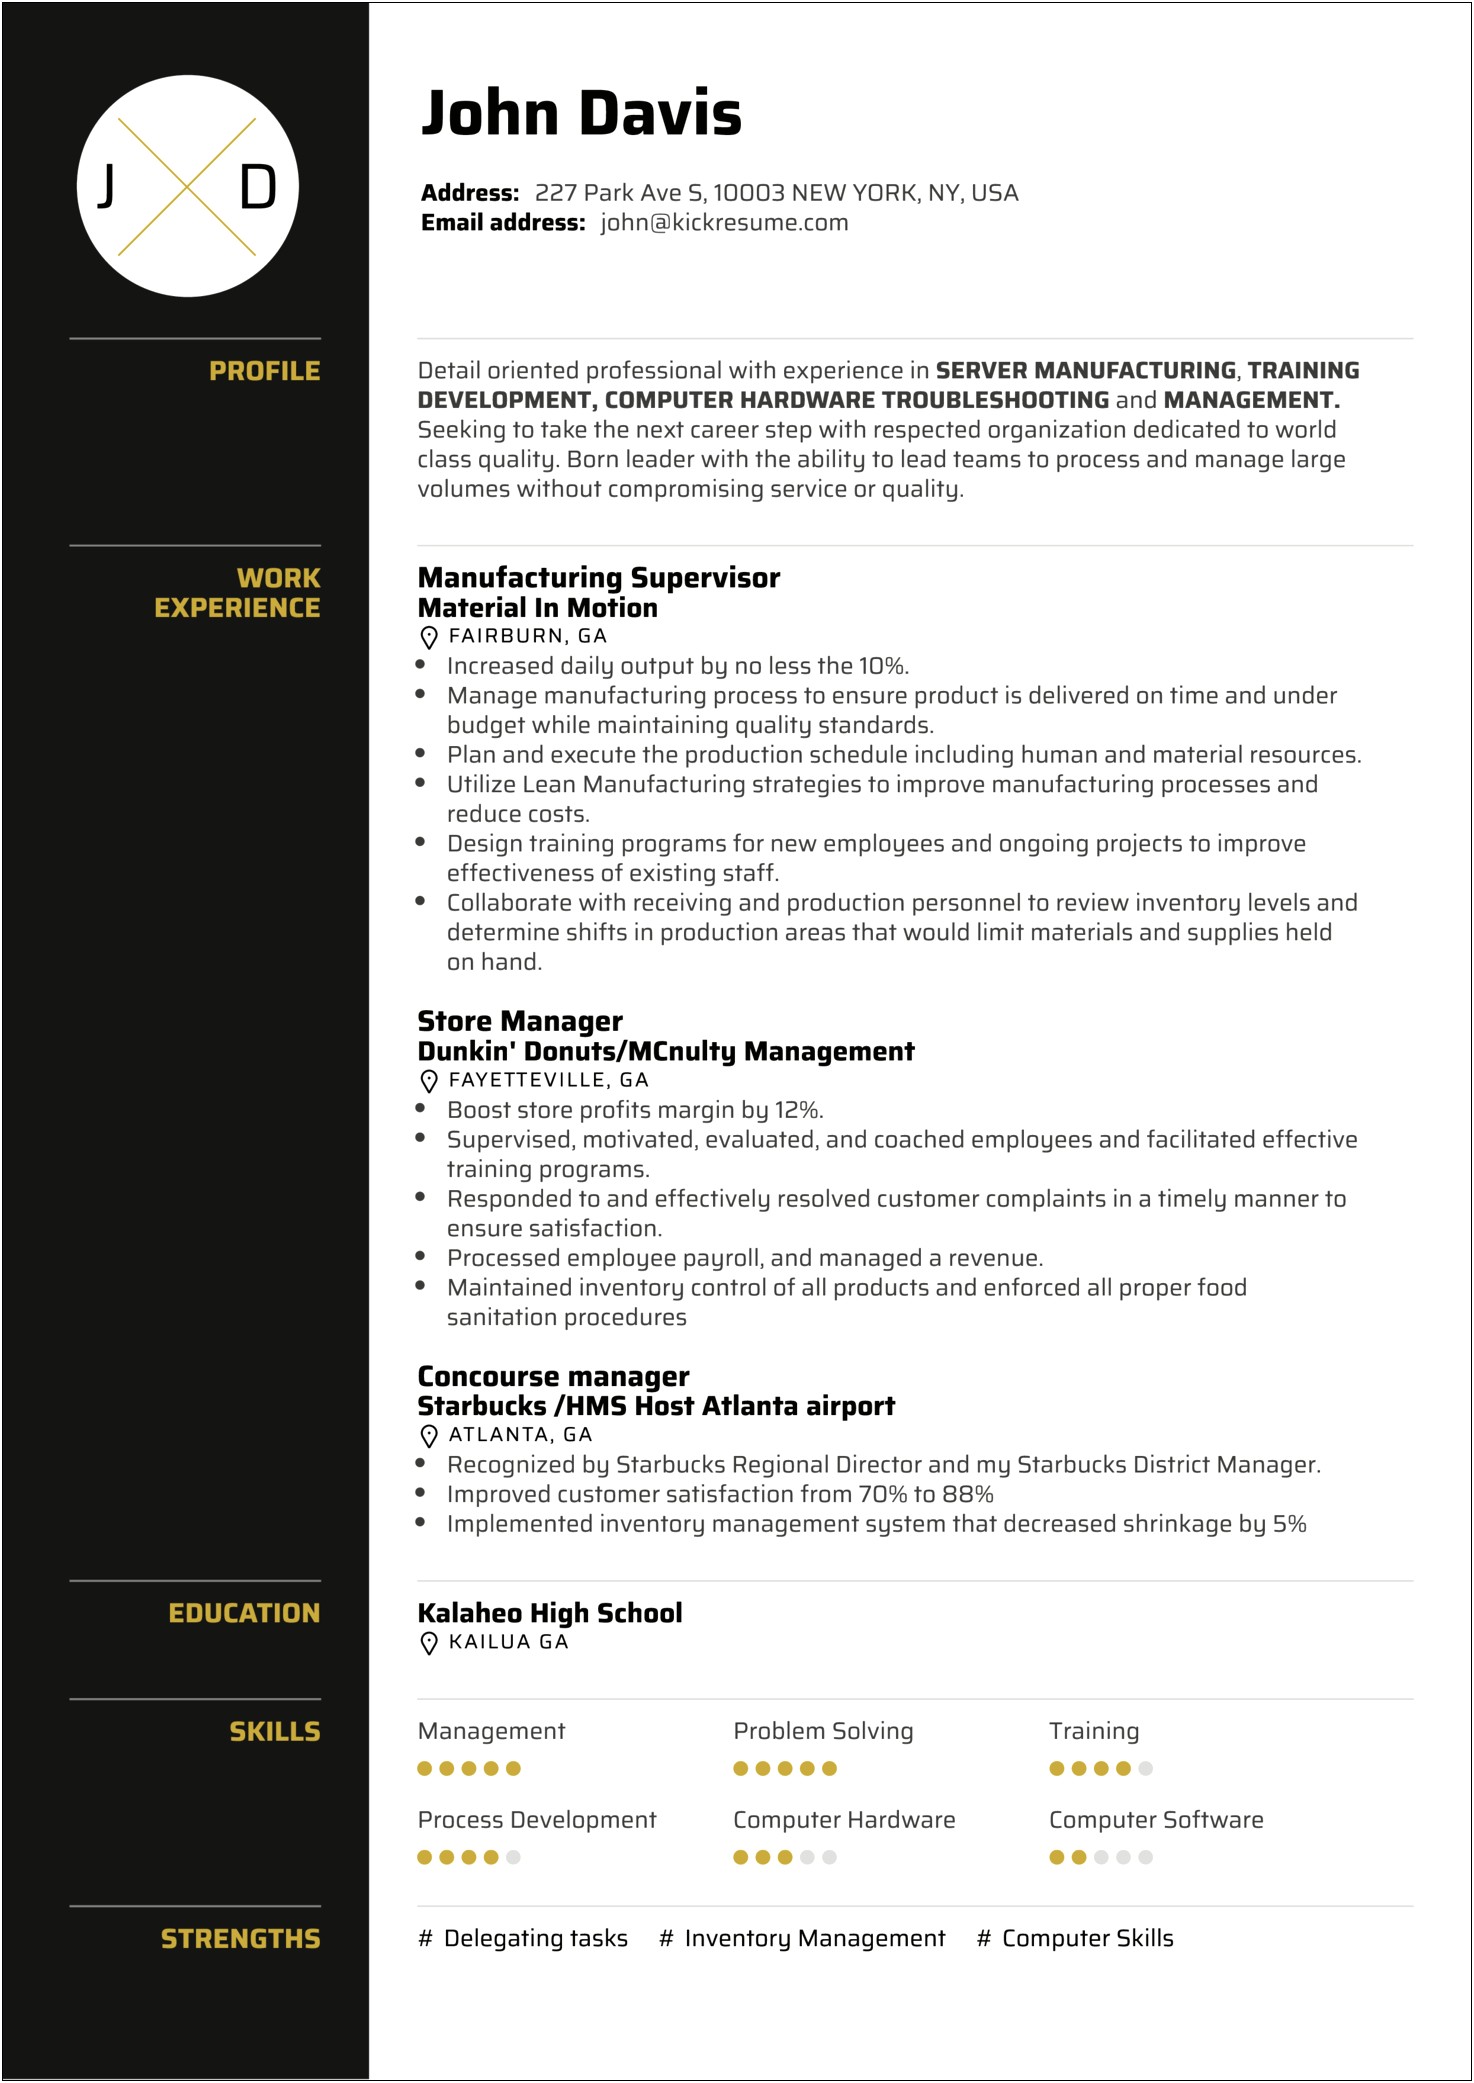 Resume Examples For Places Like Dunkin Donuts